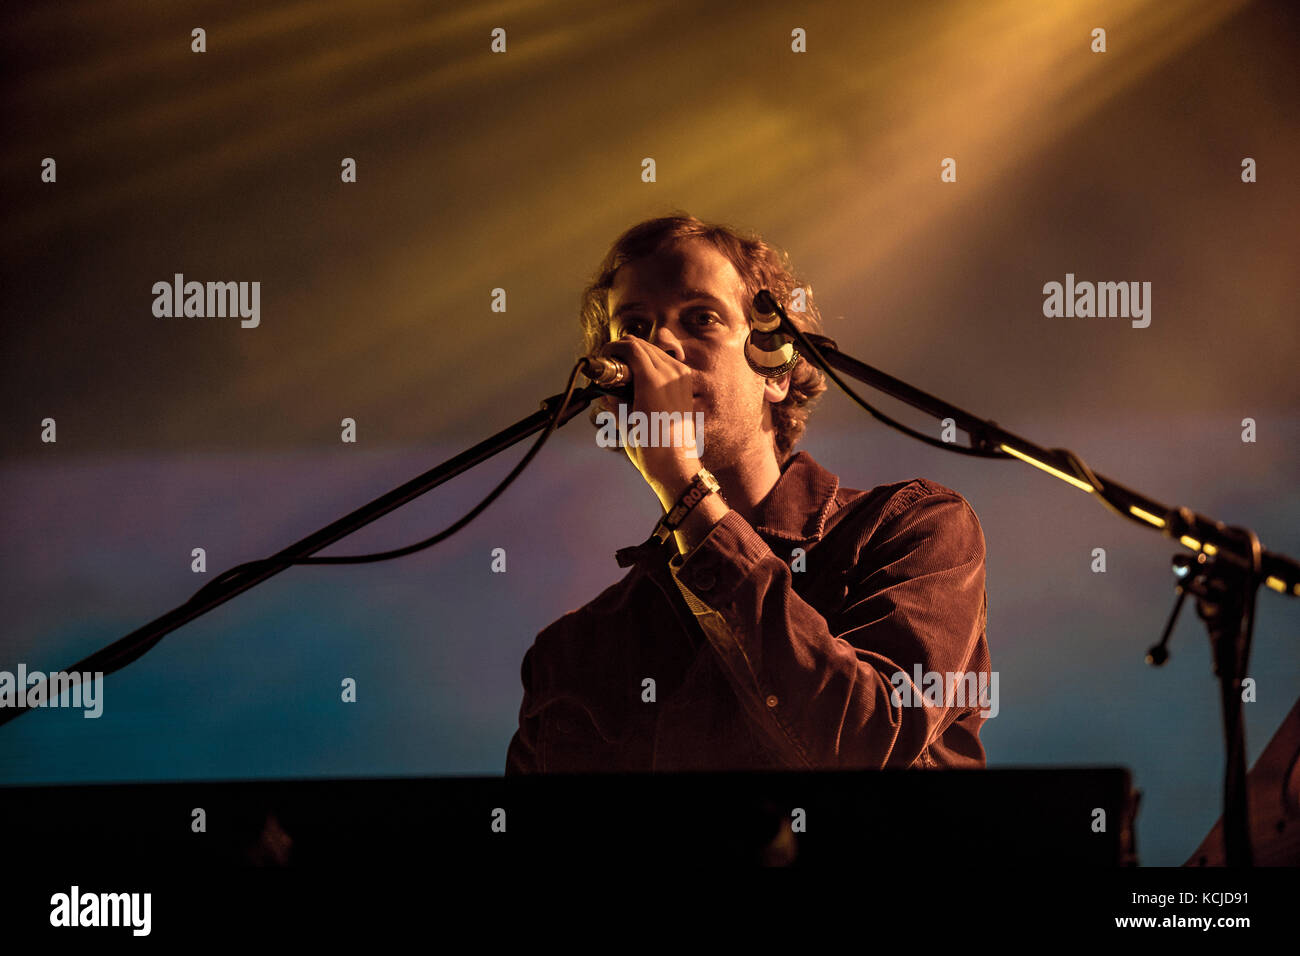 The Australian musical project Tame Impala performs a live concert at the Danish music festival Roskilde Festival 2016. Here musician Jay 'Gumby' Watson on synth is seen live on stage. Denmark, 01/07 2016. Stock Photo